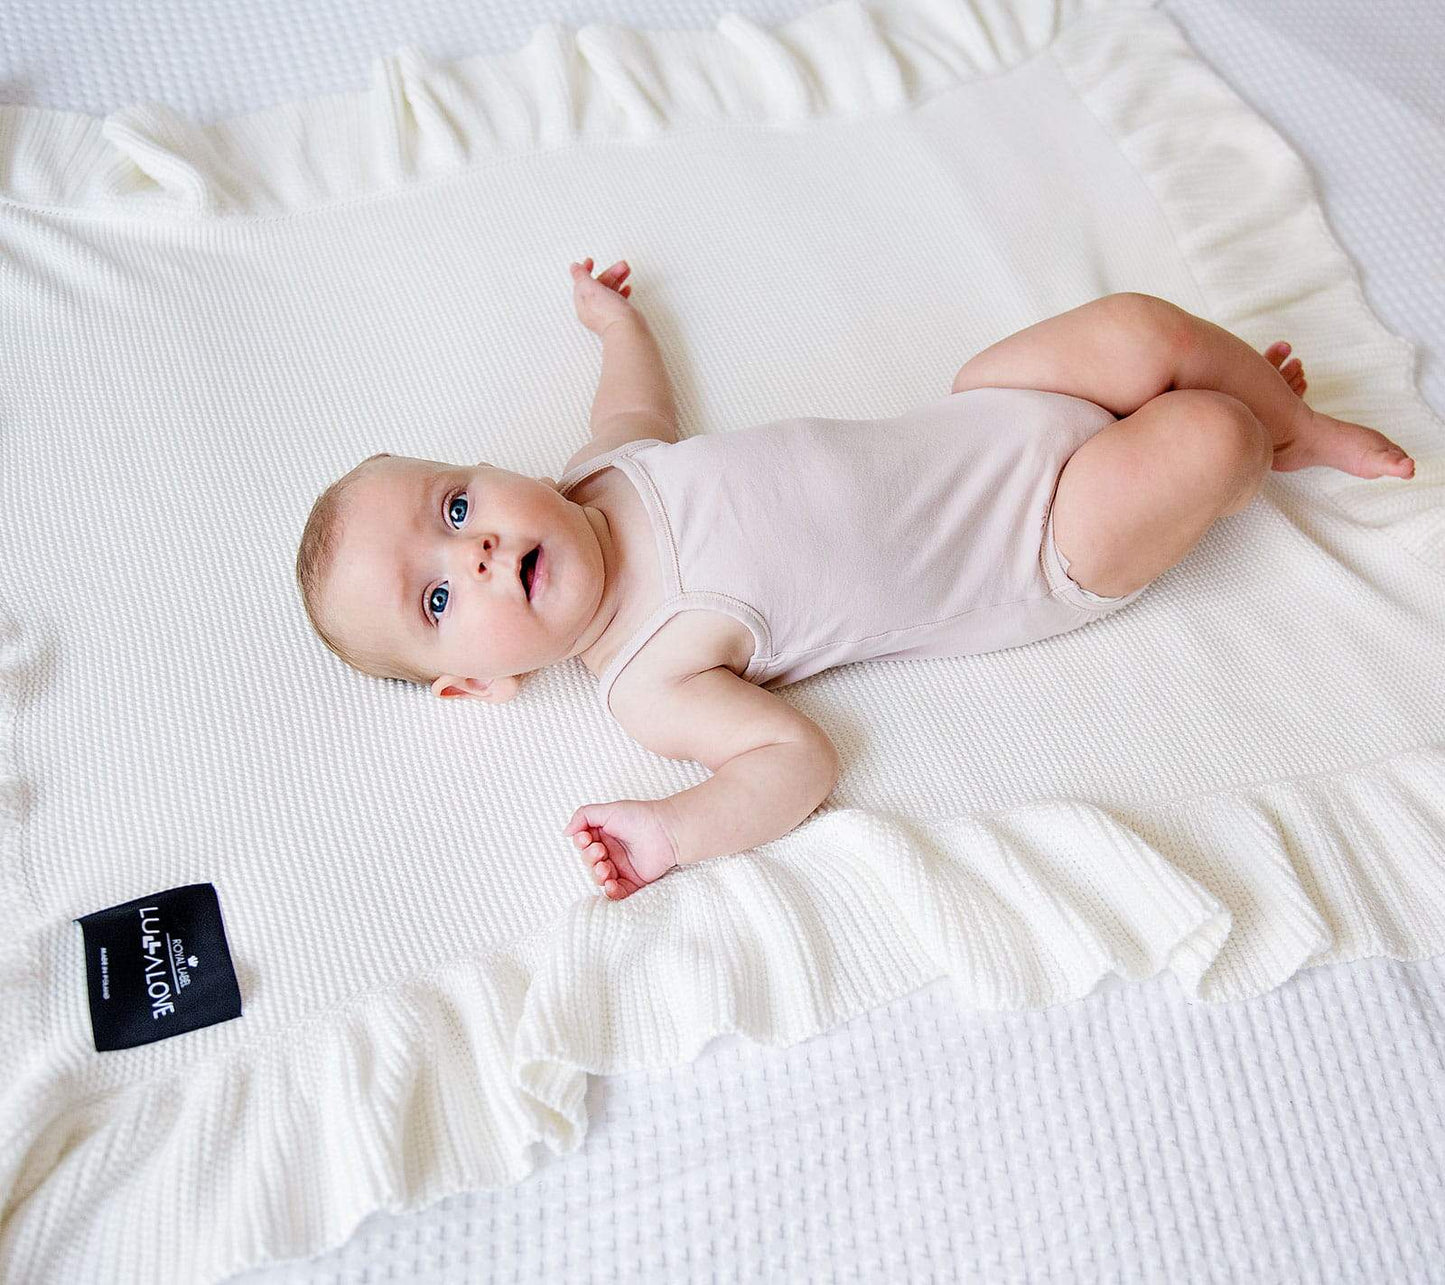 Soft bamboo baby blanket with a frill - Coconut Blanket Lullalove UK 